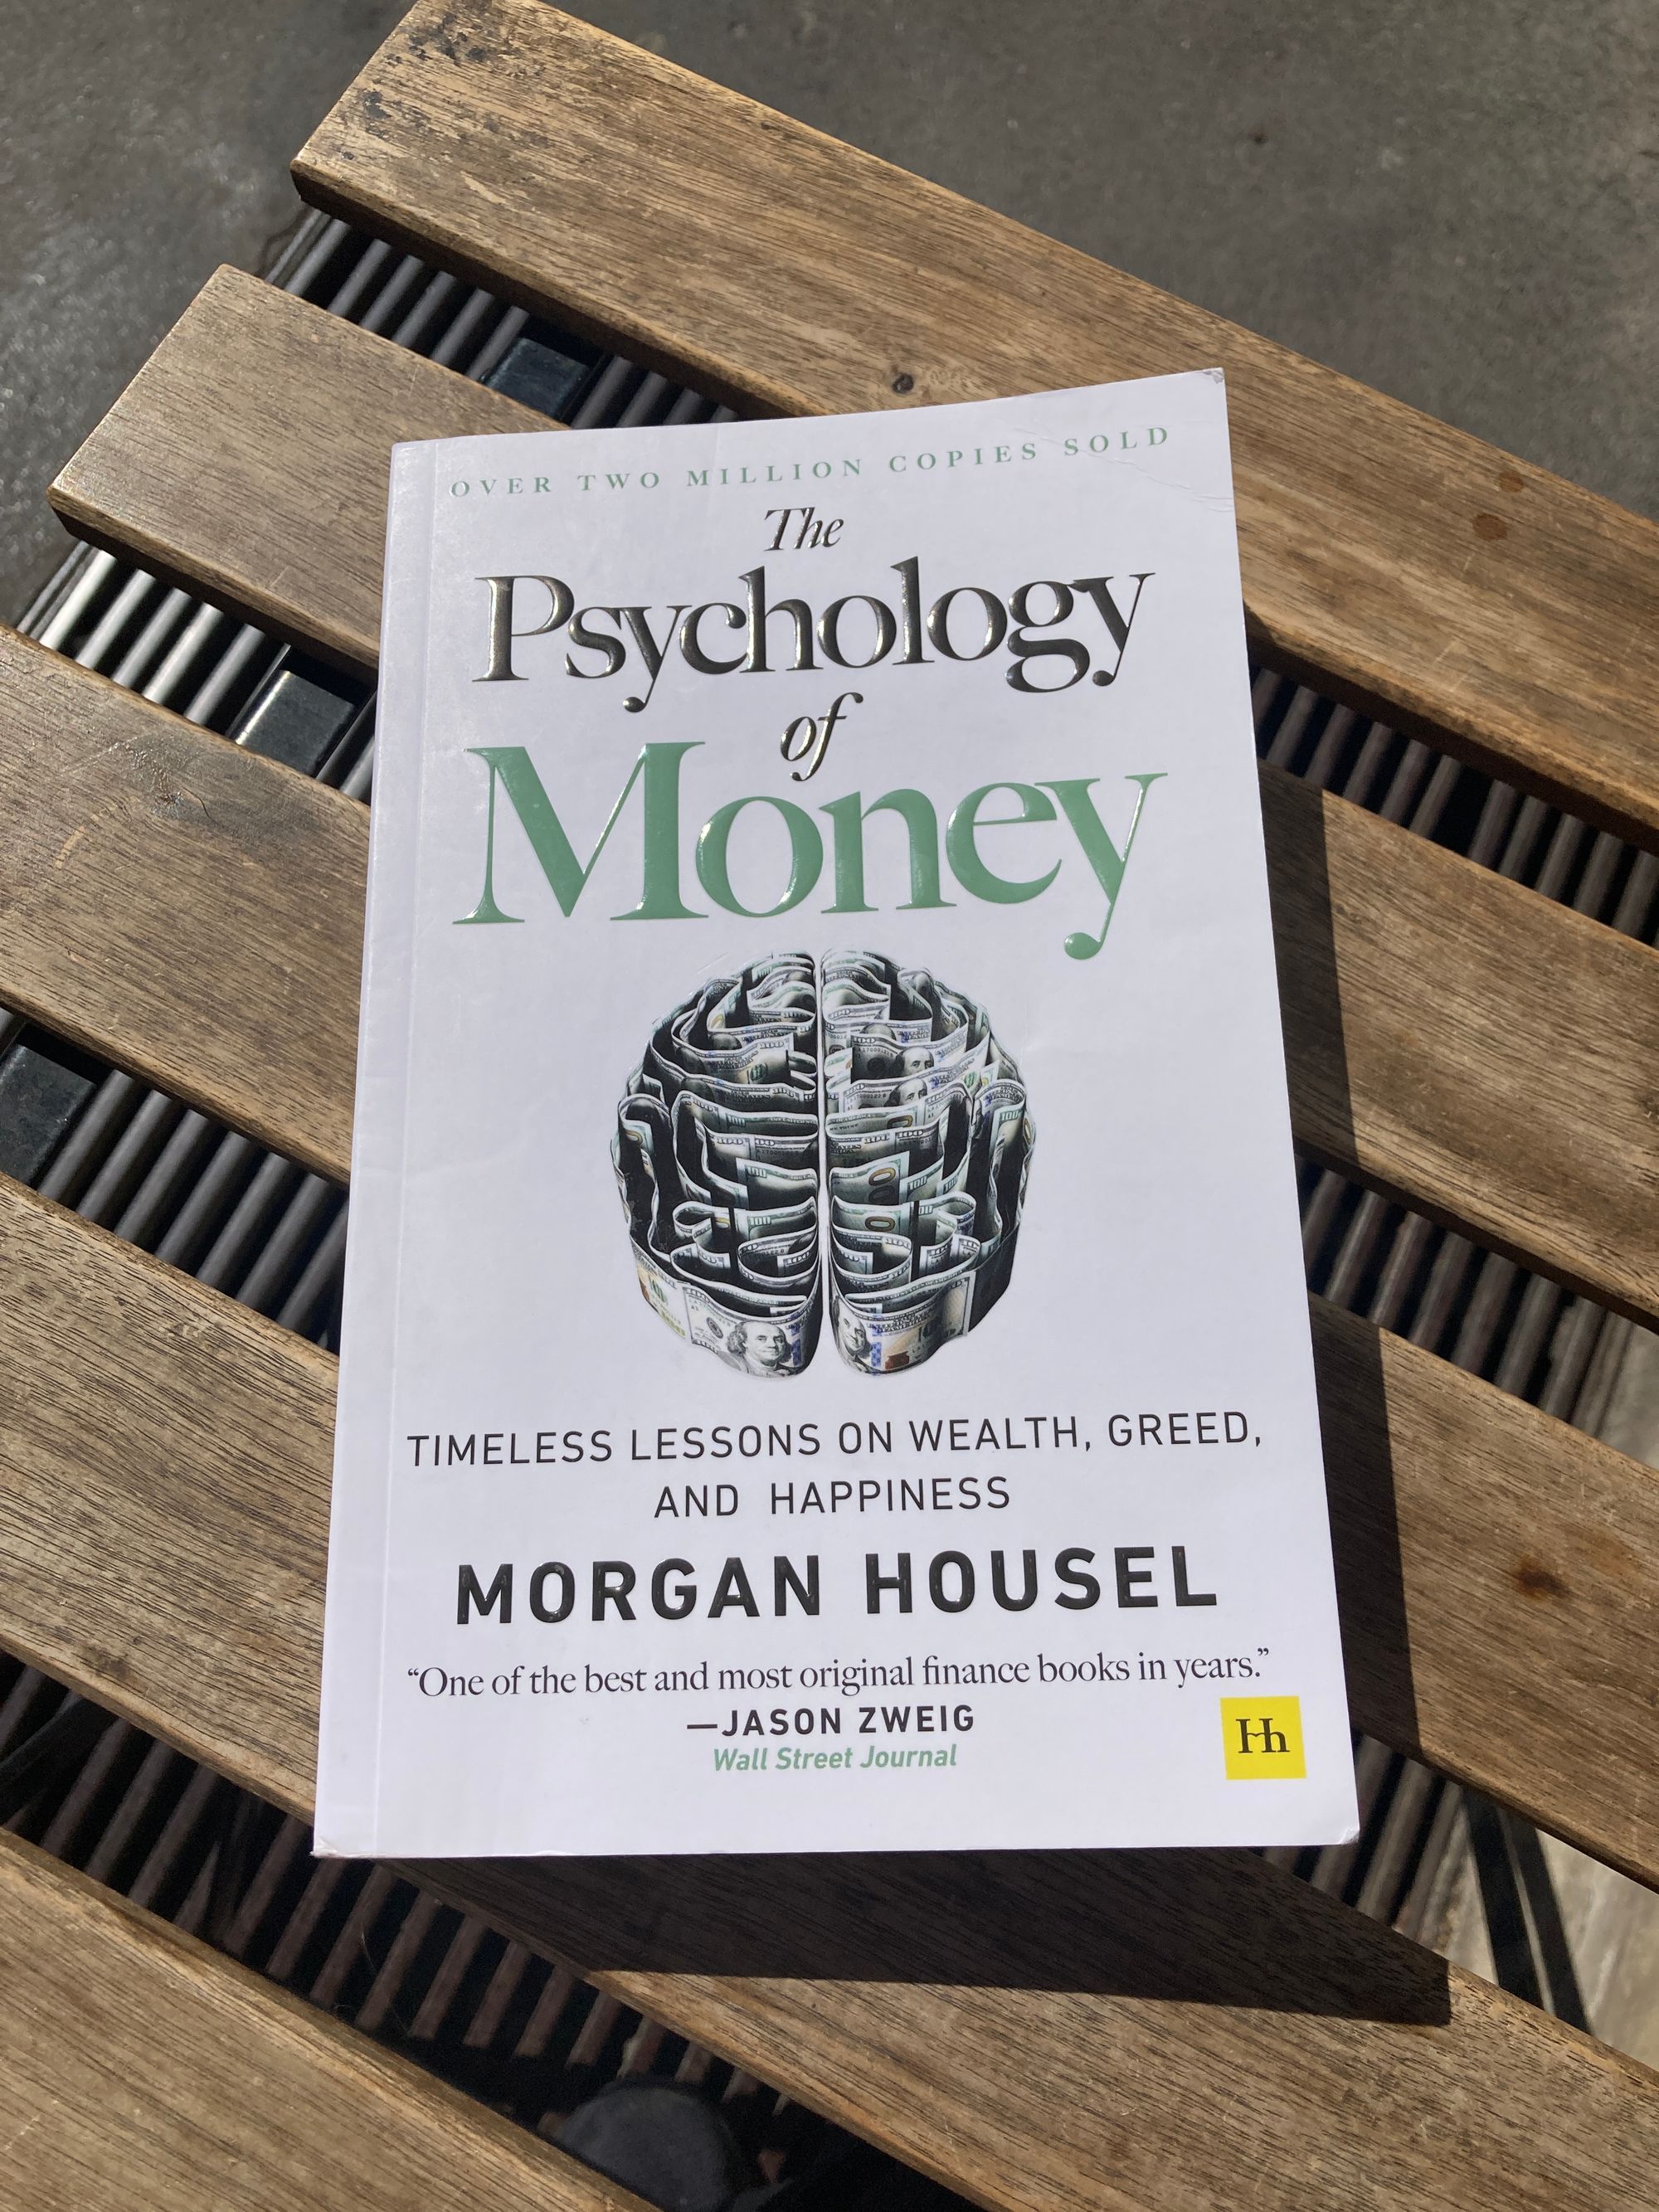 The Psychology of Money: Timeless Lessons on Wealth, Greed, and